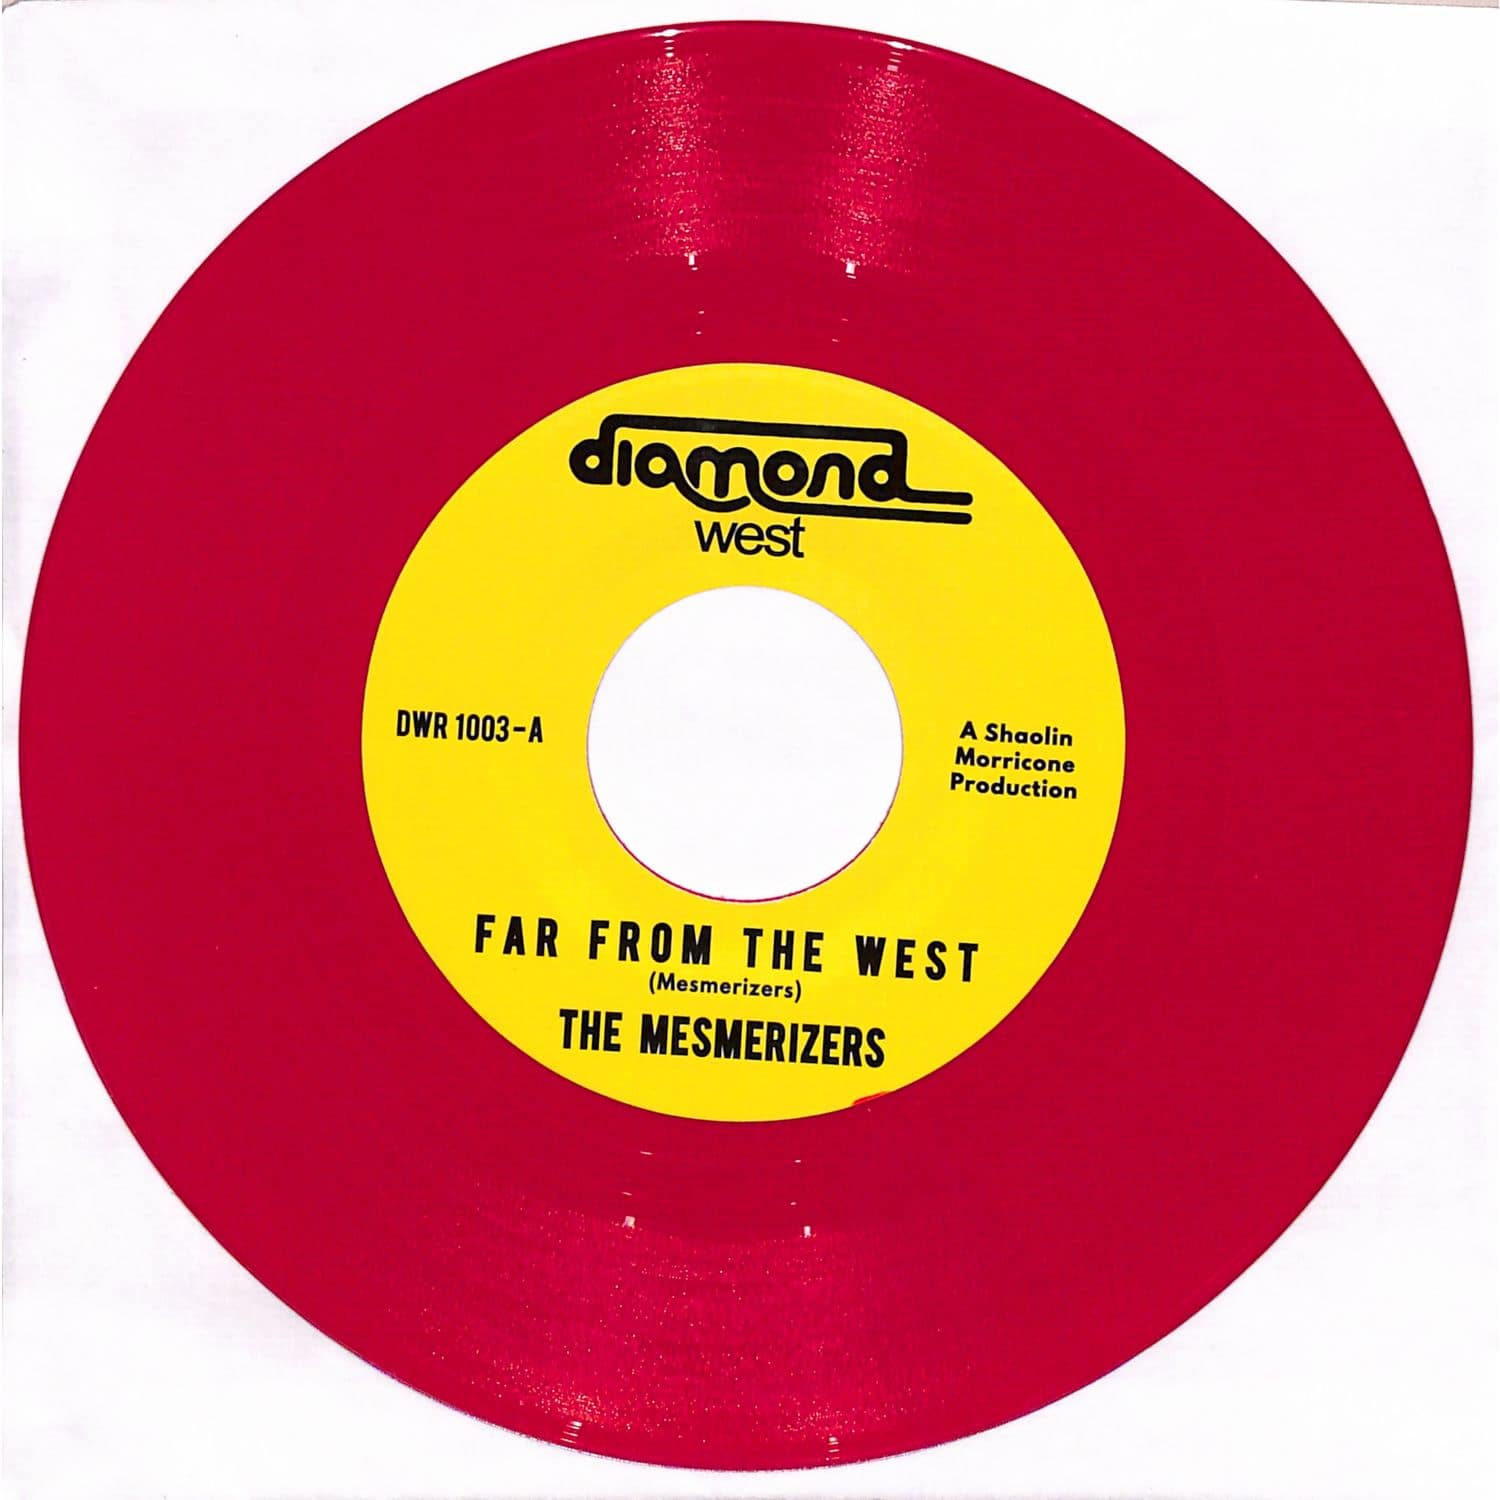 The Mesmerizers - FAR FROM THE WEST 